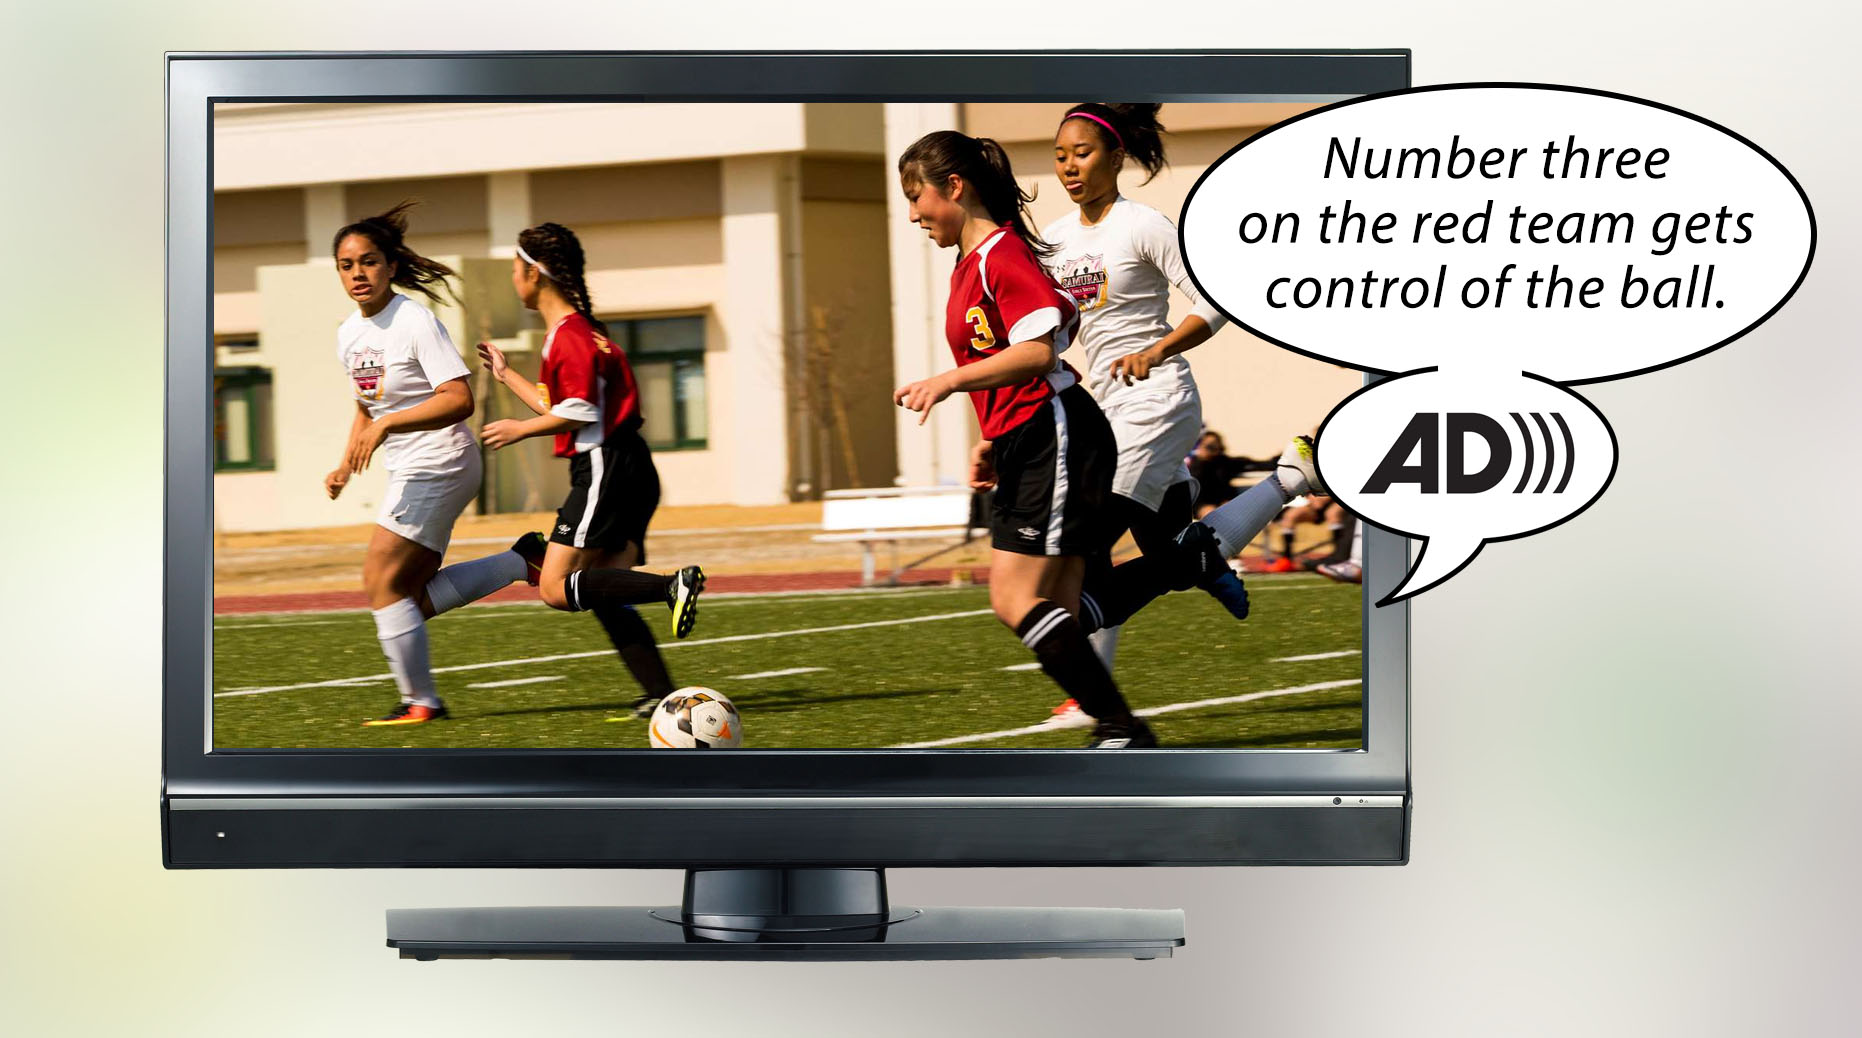 Image of a television with young women playing soccer. Word balloon indicates that words are being spoken to describe the action: Number three on the red team gets control of the ball.